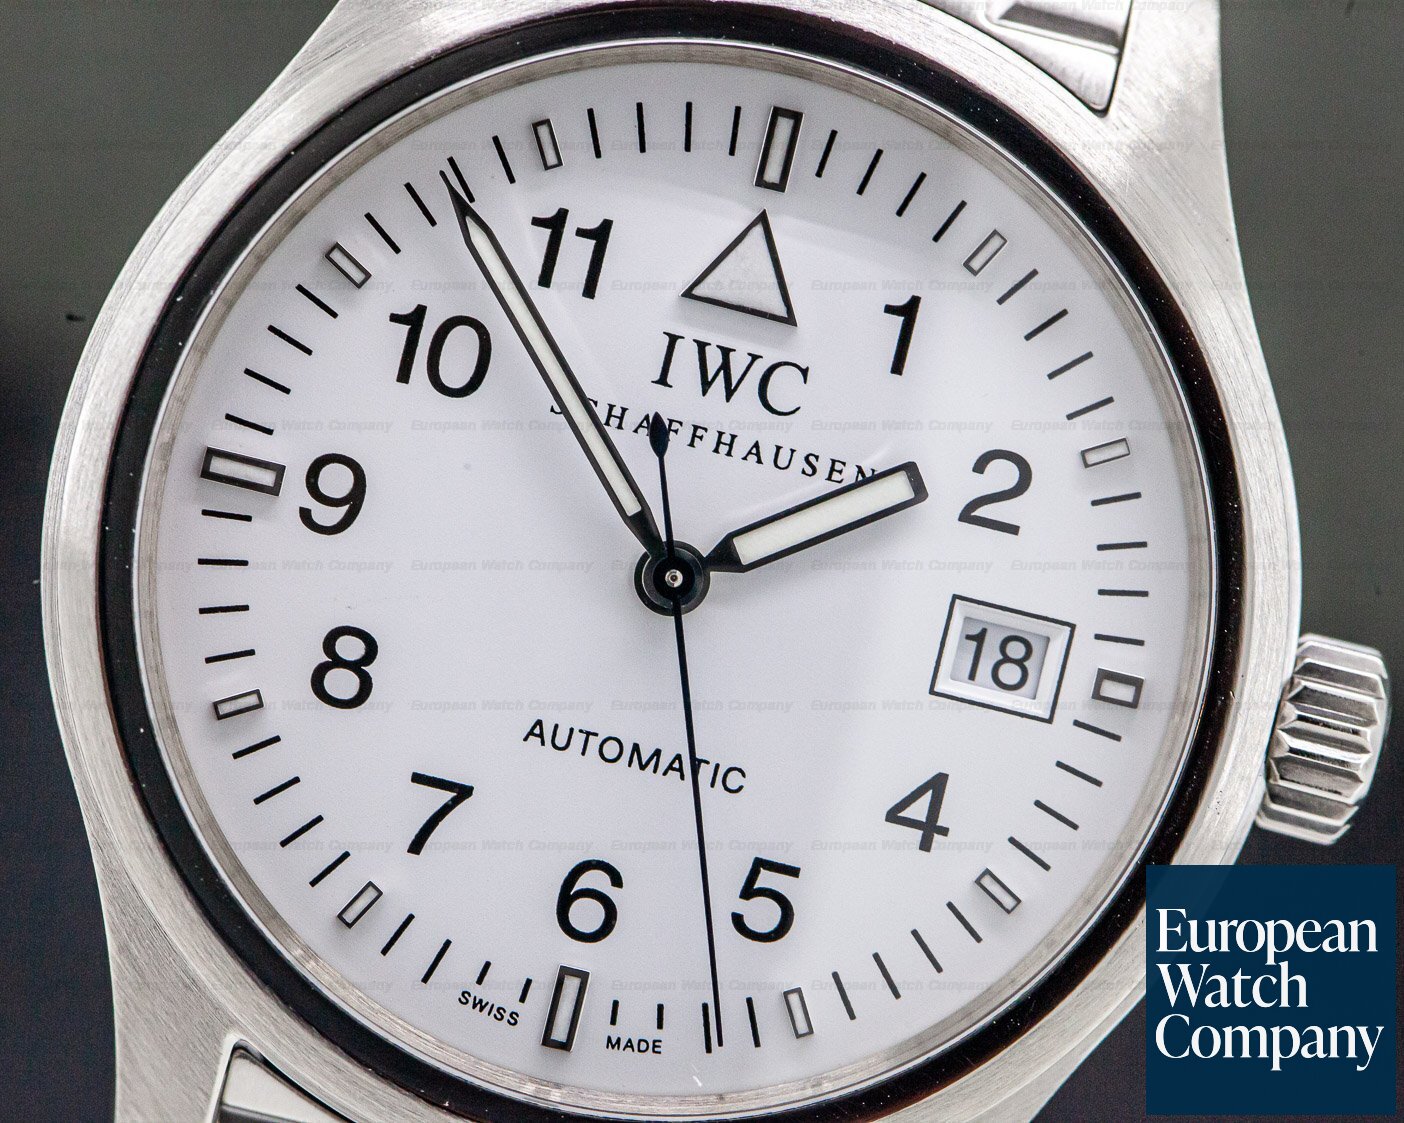 IWC Mark XV White Dial SS / Bracelet LIMITED TO 50 PIECES Ref. 3253-06